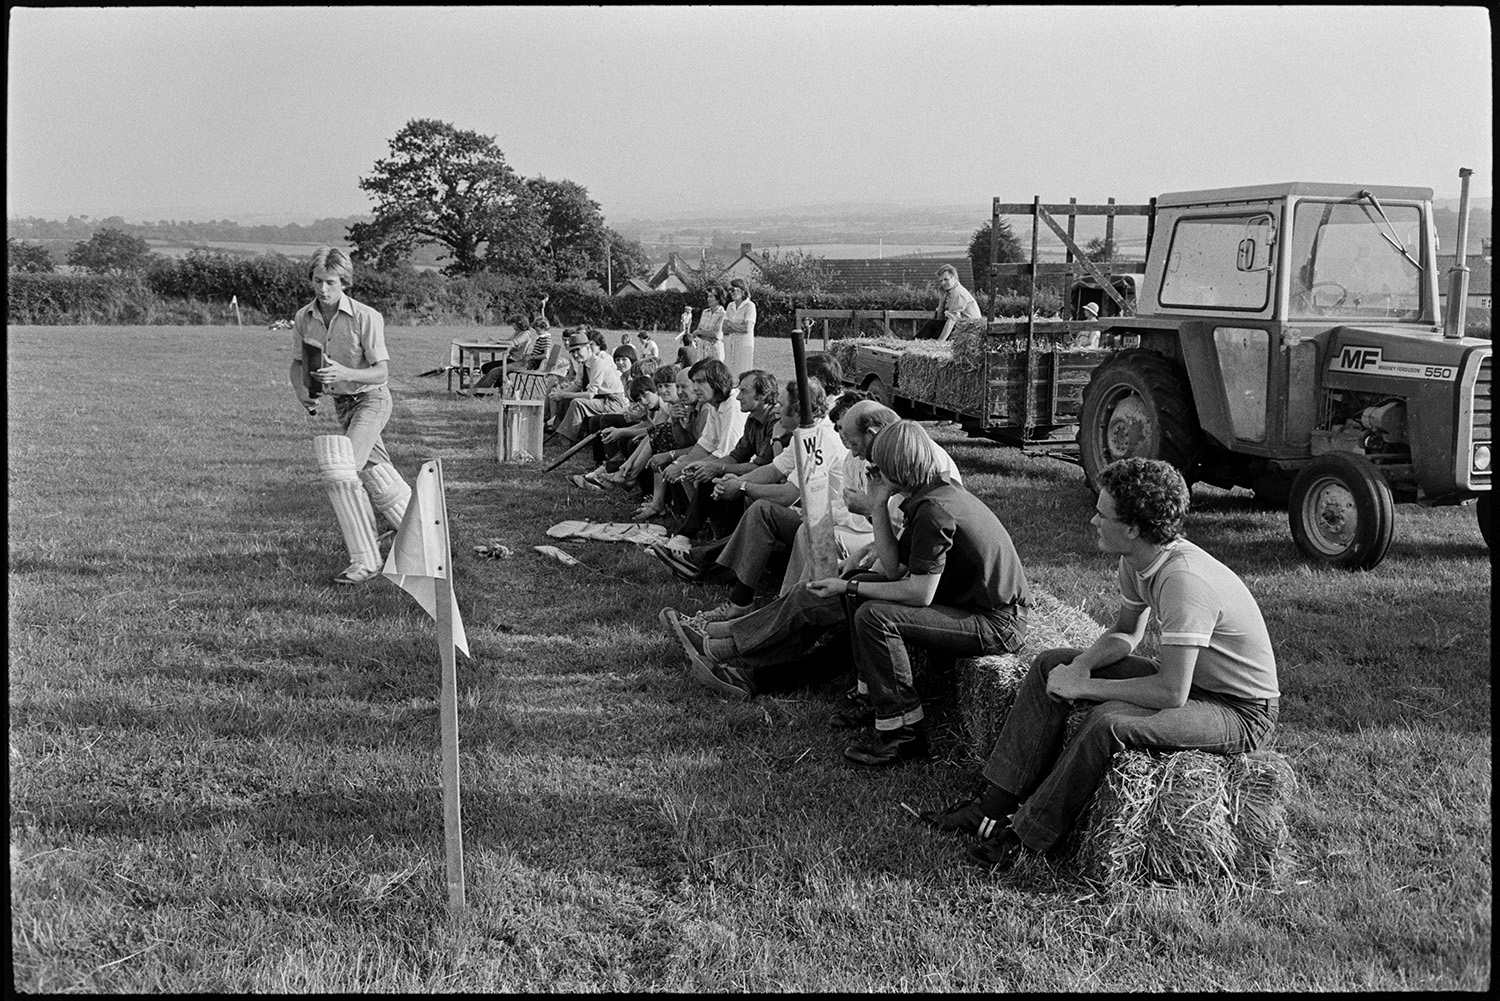 Spectators at cricket match sitting on straw bales, church tower in background, tractors. 
[Spectators sat on straw bales watching a cricket match in a field at Iddesleigh. A man is walking up to go into bat. He is wearing knee pads and holding a cricket bat. A tractor and trailer with more straw bales is parked behind the spectators.]